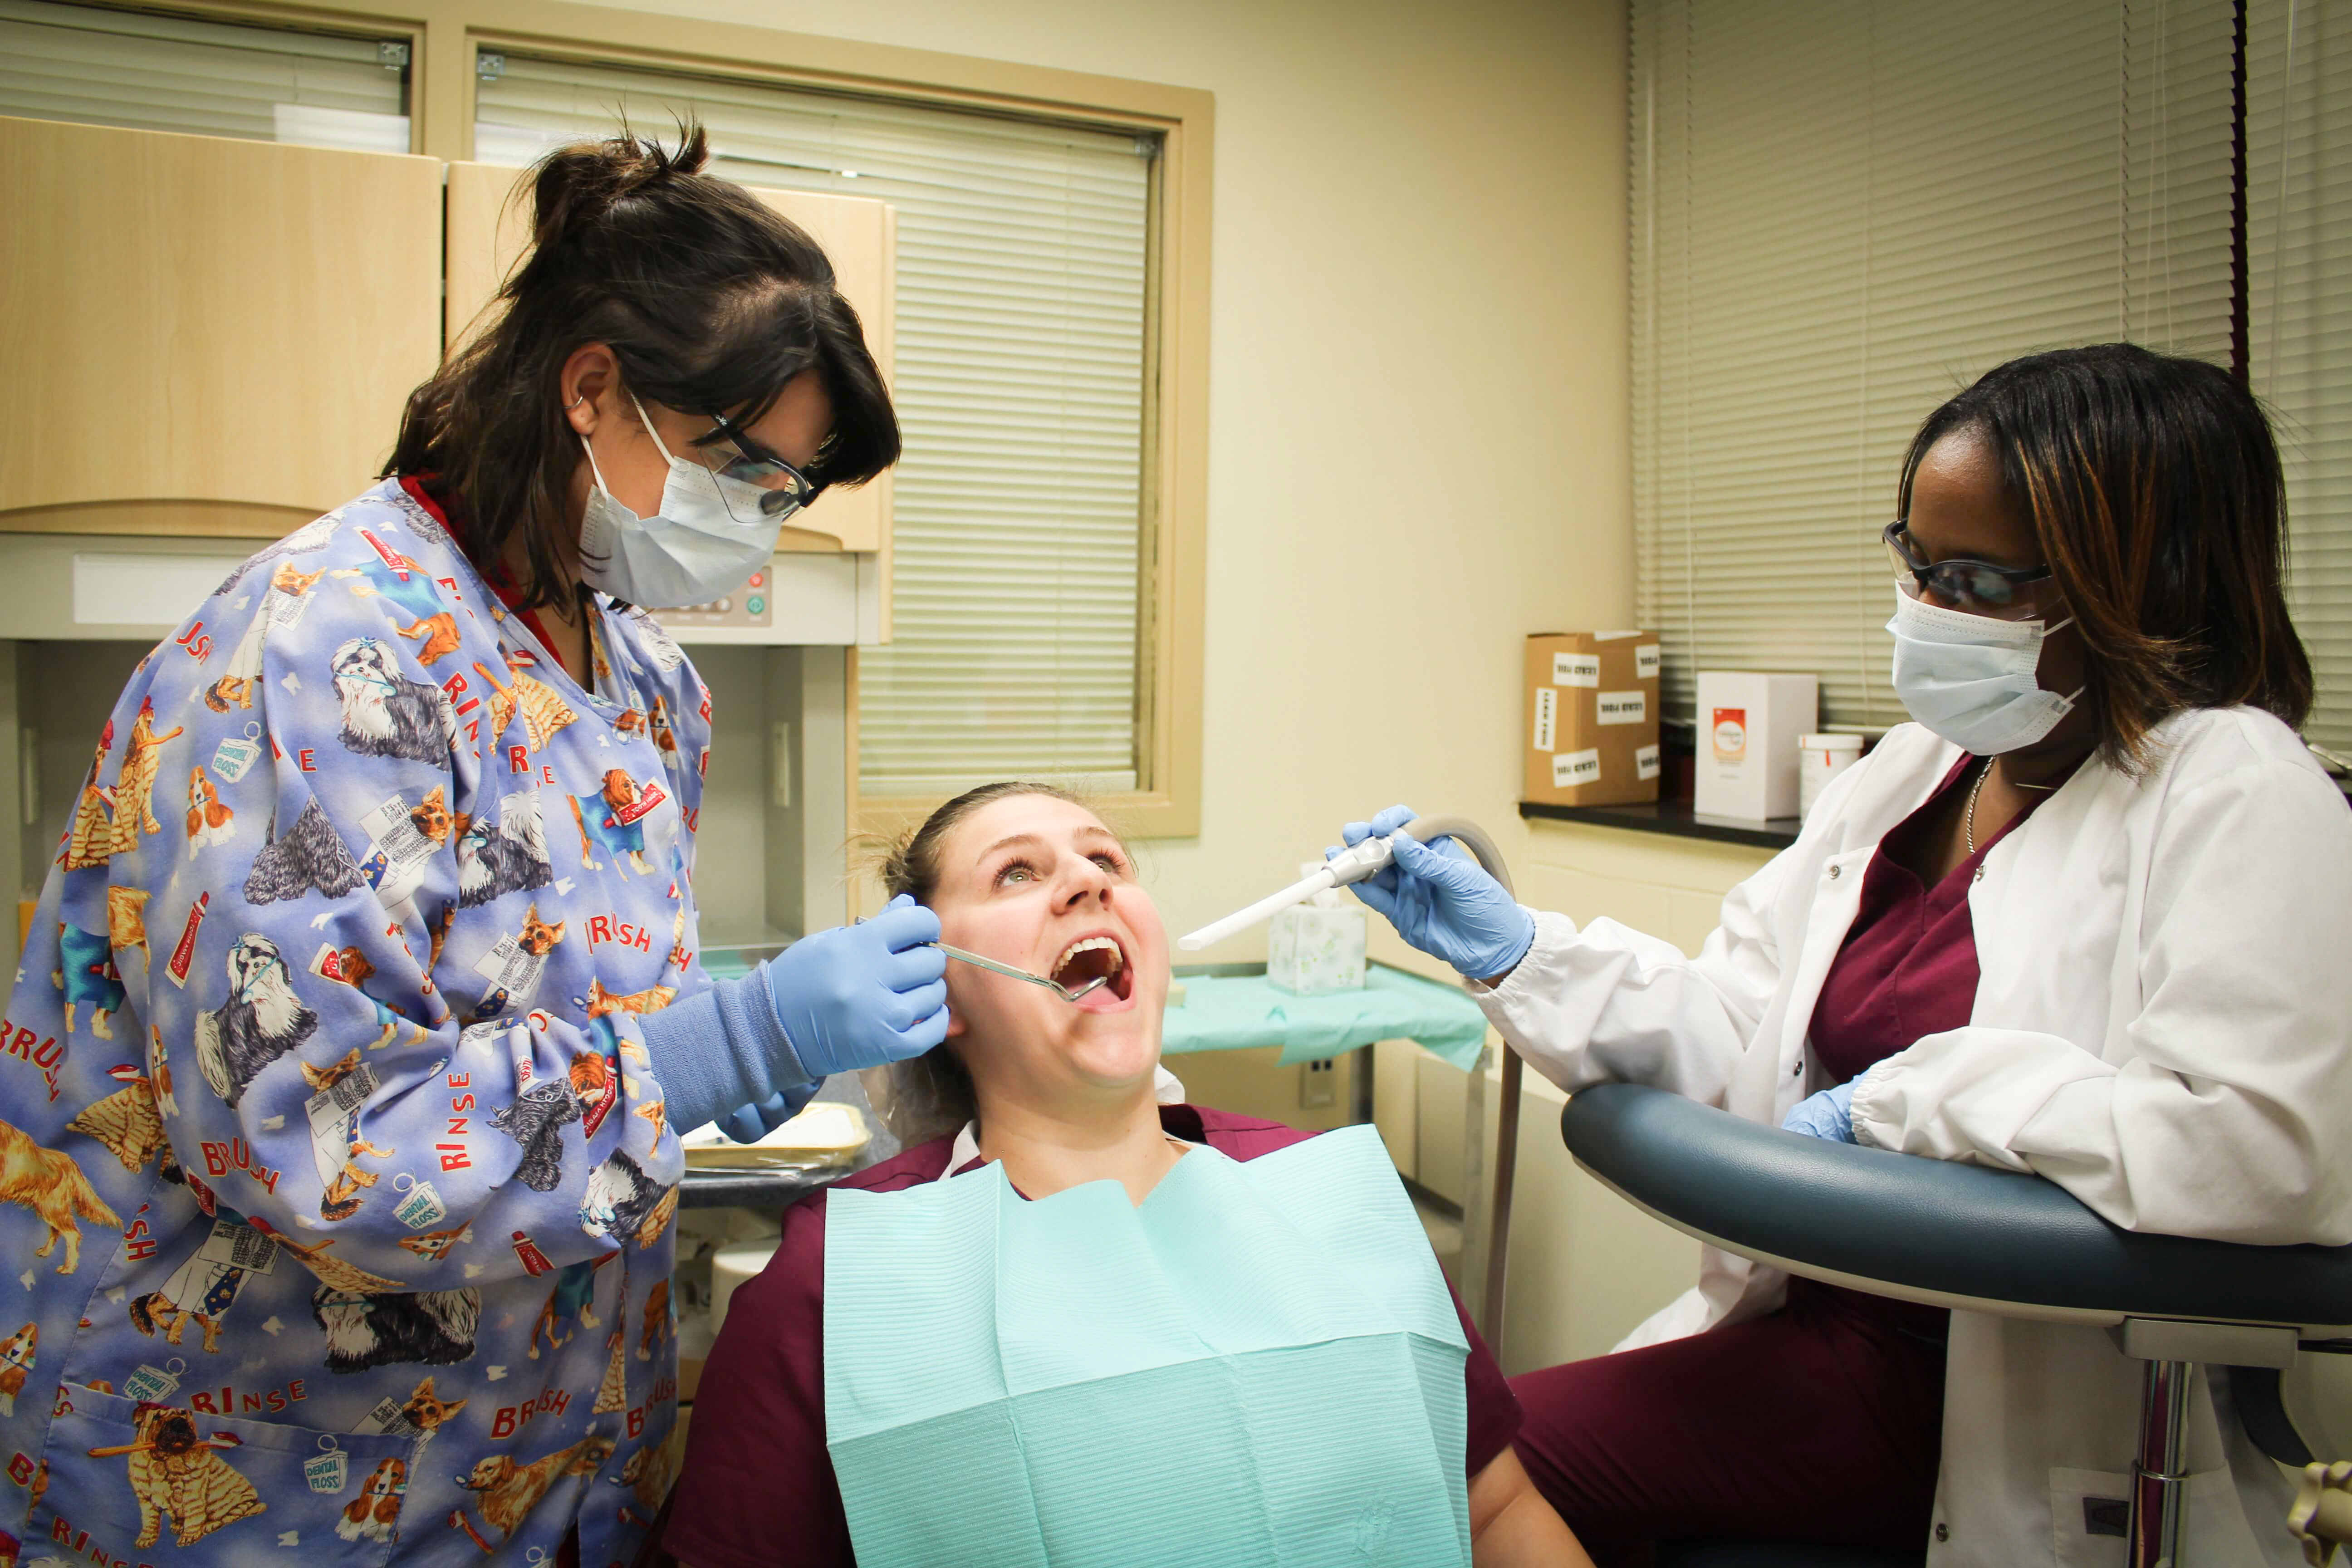 Dental assistant students on the Asnuntuck campus practice skills